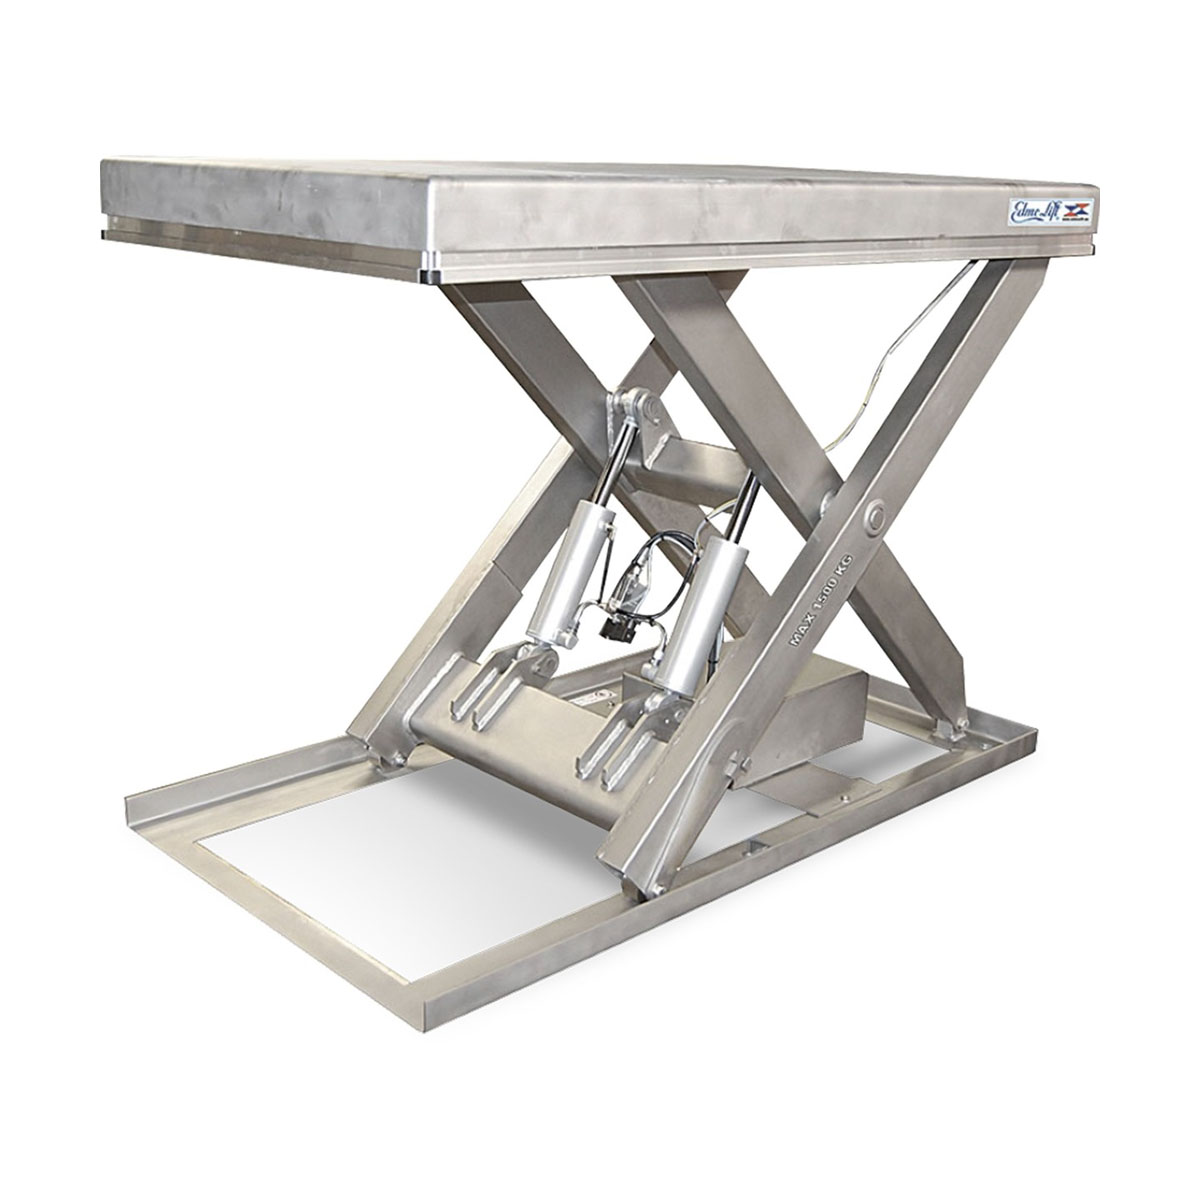 Buy Scissor Lift Table (Electric - Stainless Steel) in Scissor Lift Tables from Edmolift available at Astrolift NZ